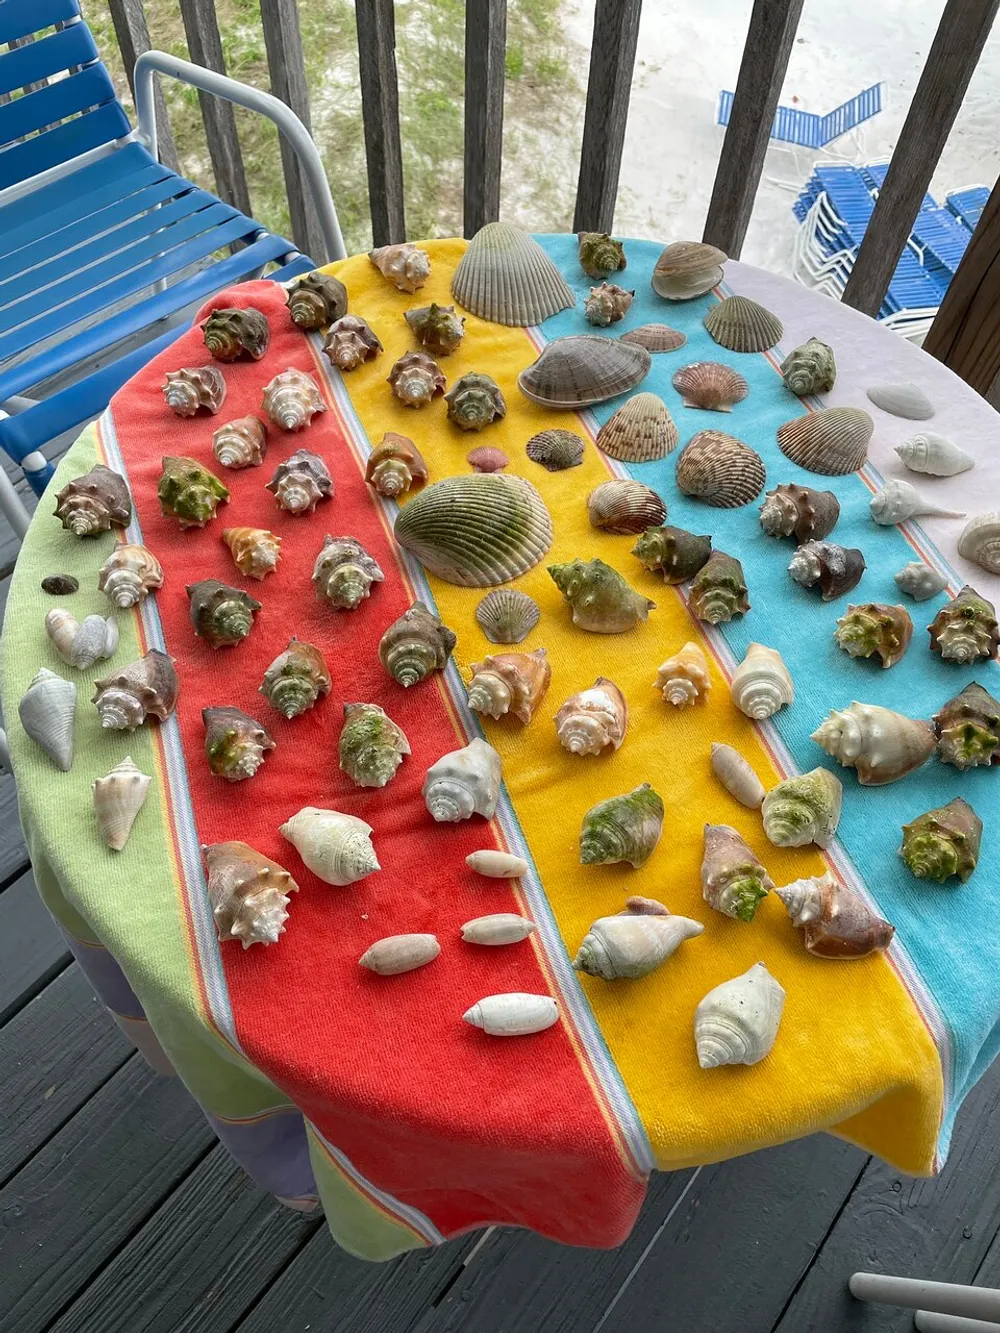 A collection of various seashells is neatly arranged on a colorful striped towel on an outdoor table with a beachside backdrop